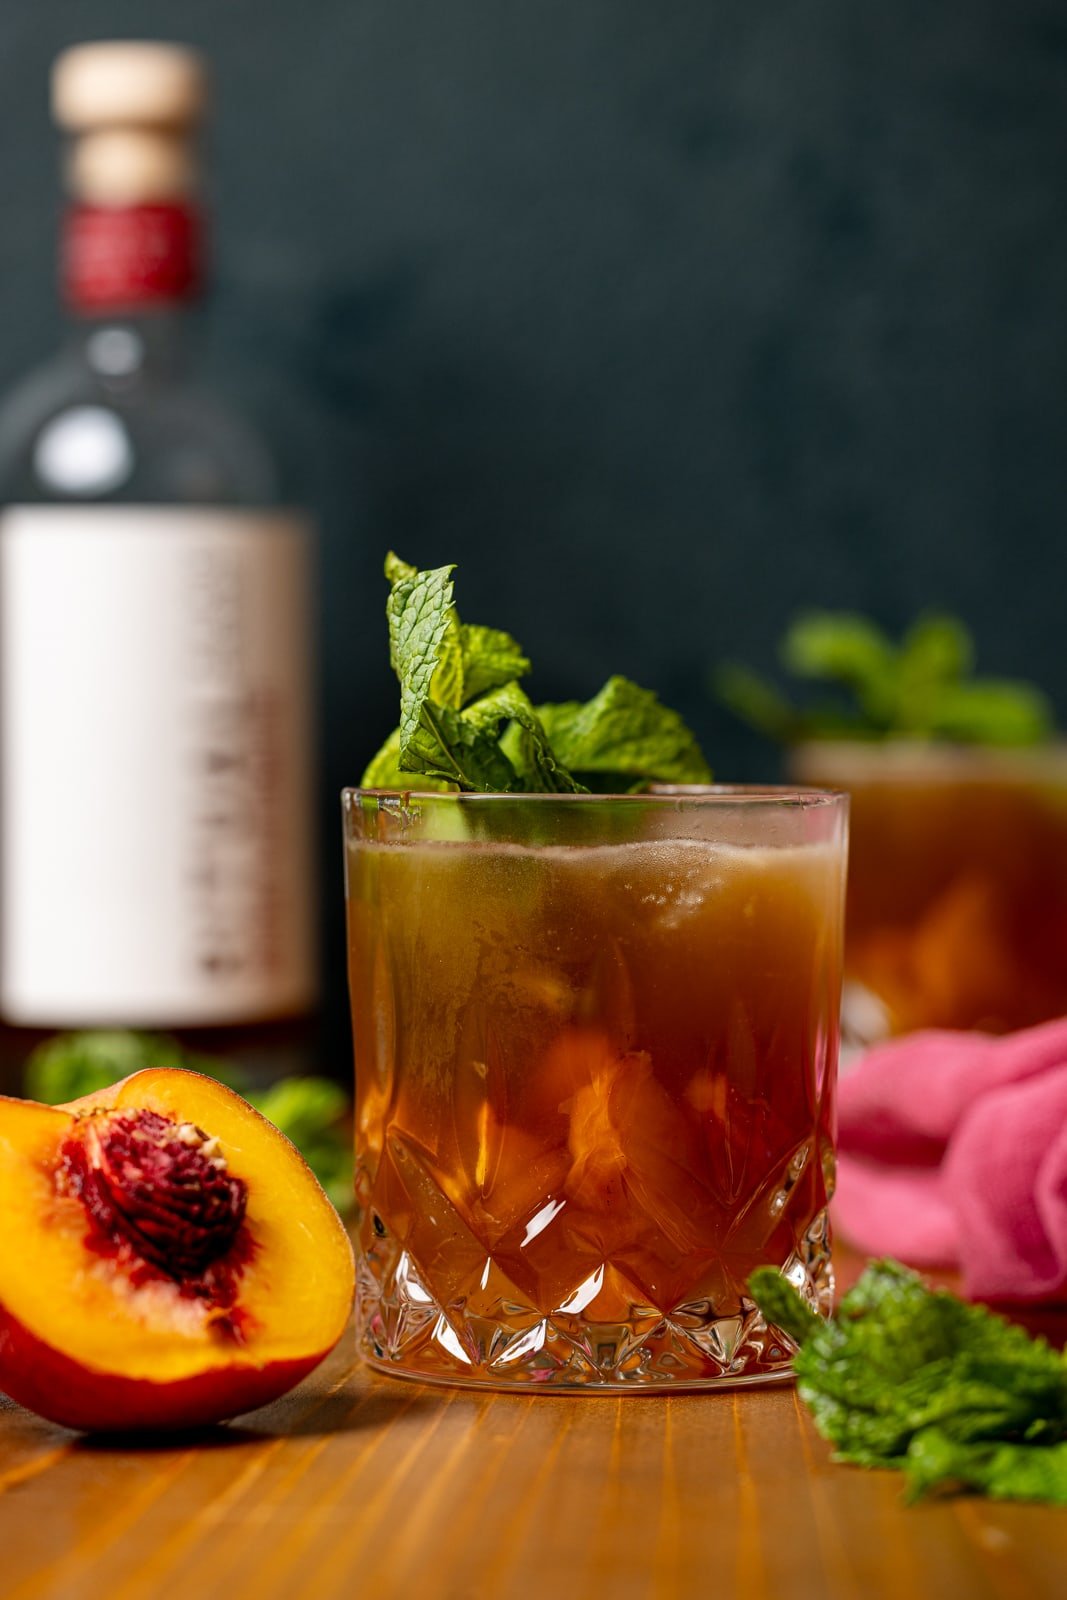 Mocktail in glasses with peaches, mint leaves, and bottle of alcohol alternative.